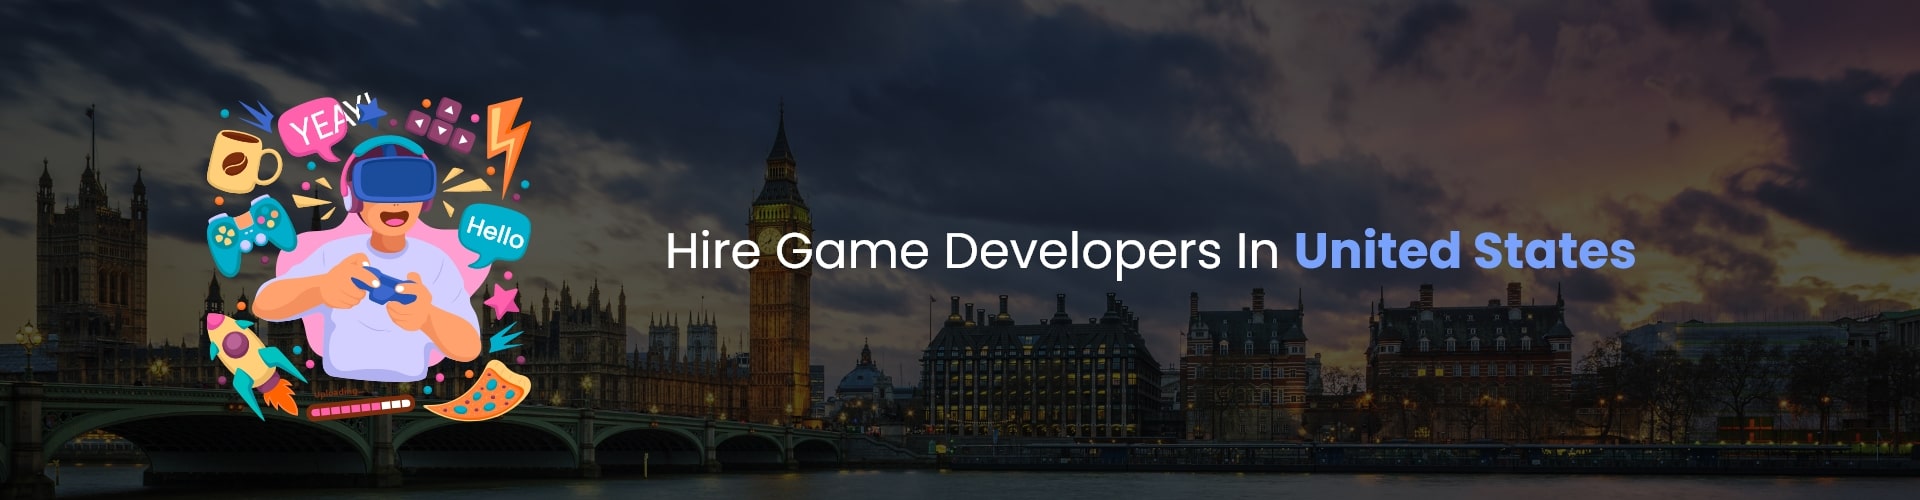 hire game developers in united states